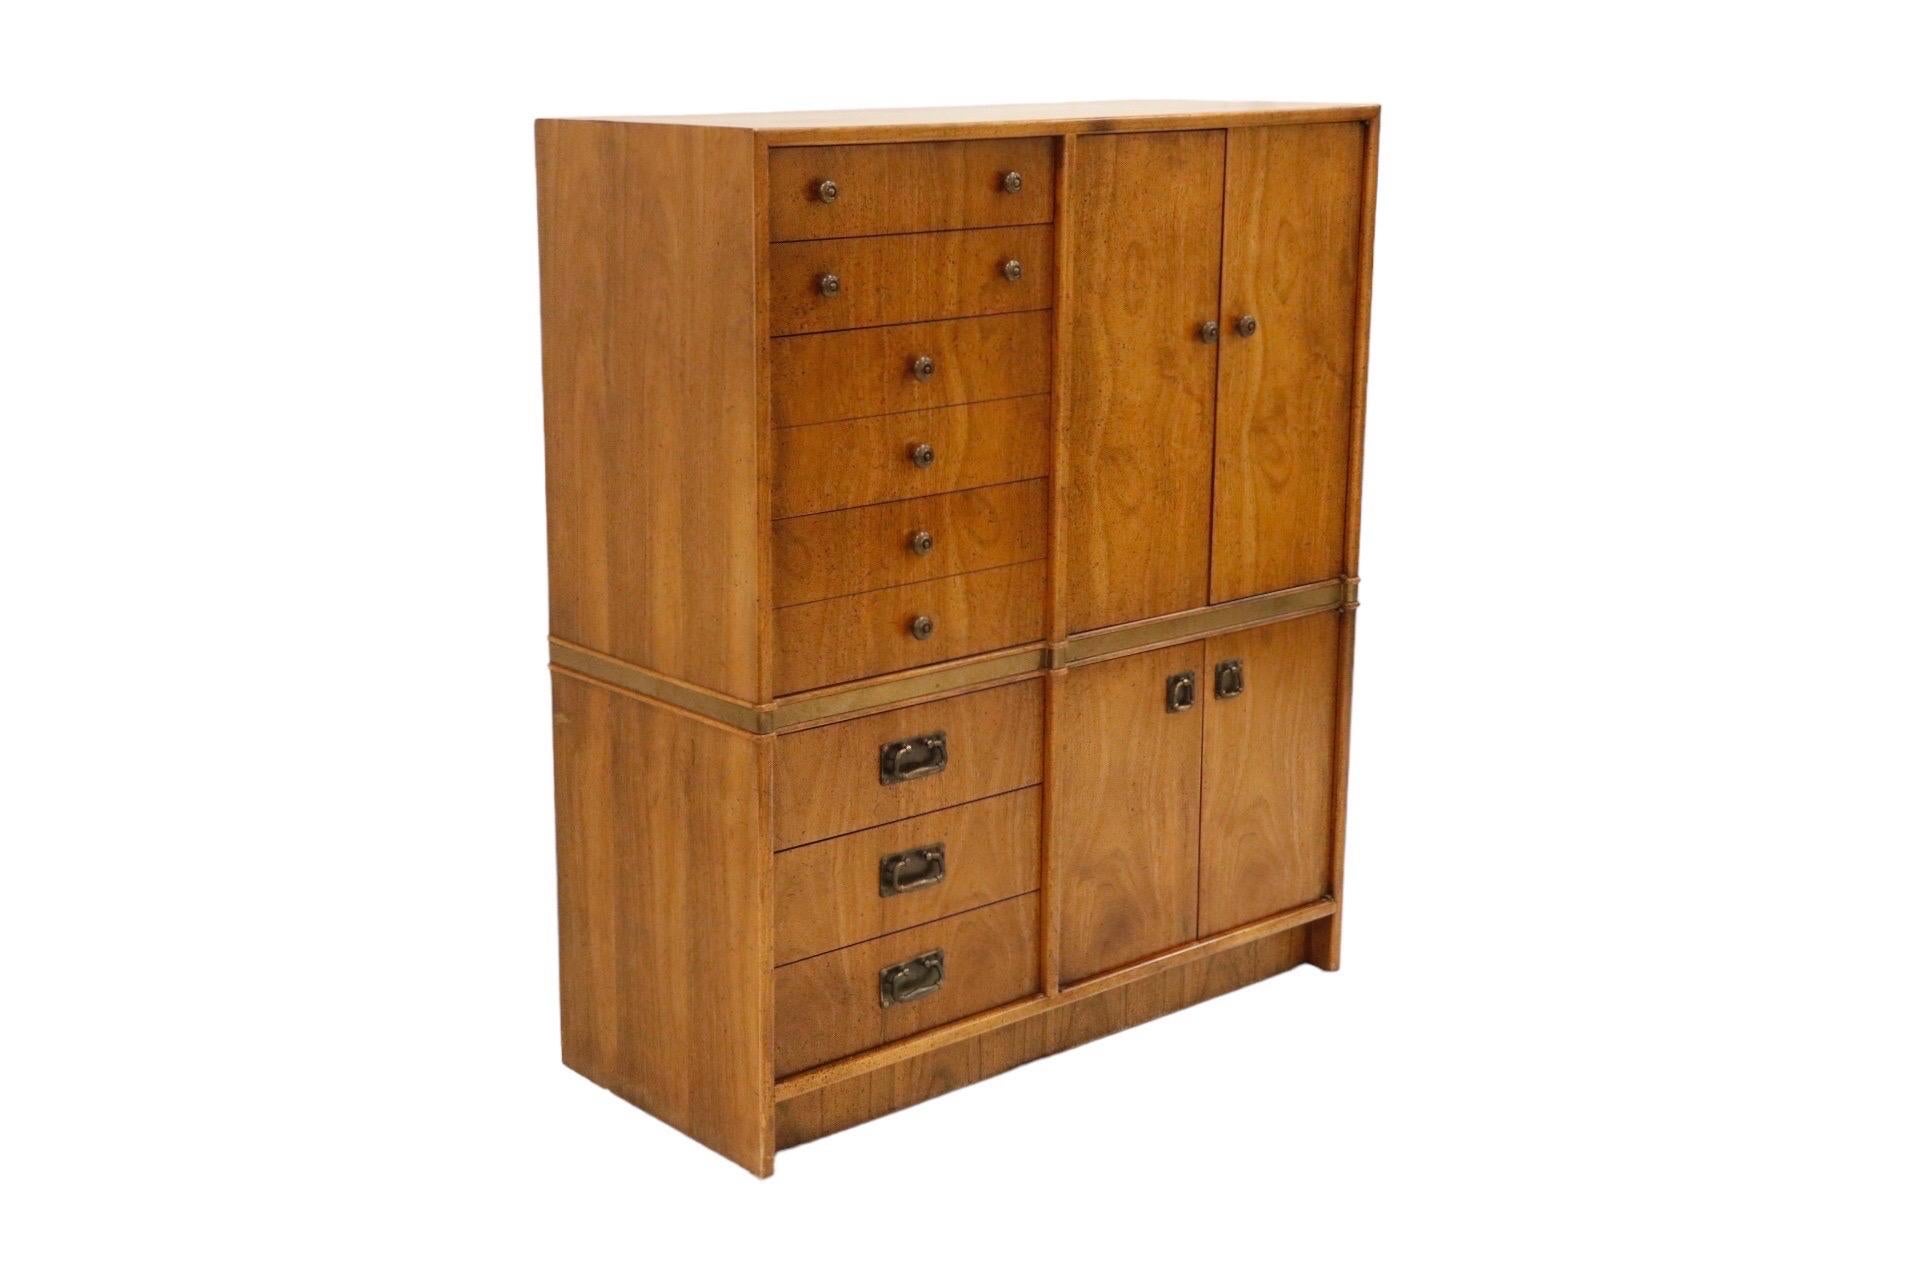 A 1972 campaign style gentleman’s dresser or chiffonier made by Hickory Manufacturing Company, decorated with Paldao veneers. Four graduated drawers to the left, and an upper cabinet to the right, are separated from three lower drawers and a lower